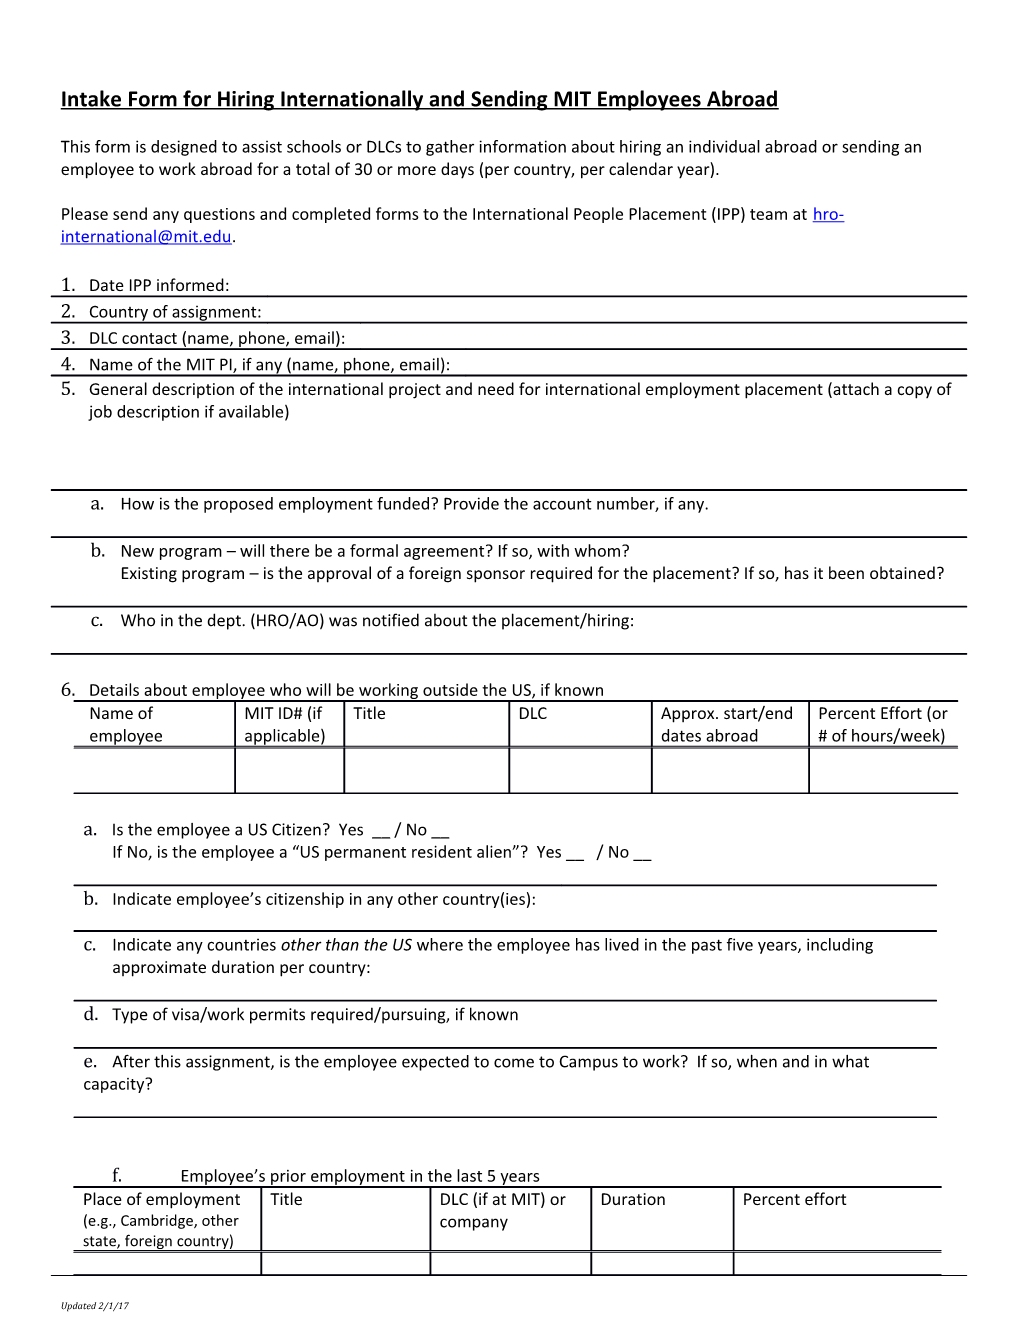 Intake Form for Hiring Internationally and Sending MIT Employees Abroad